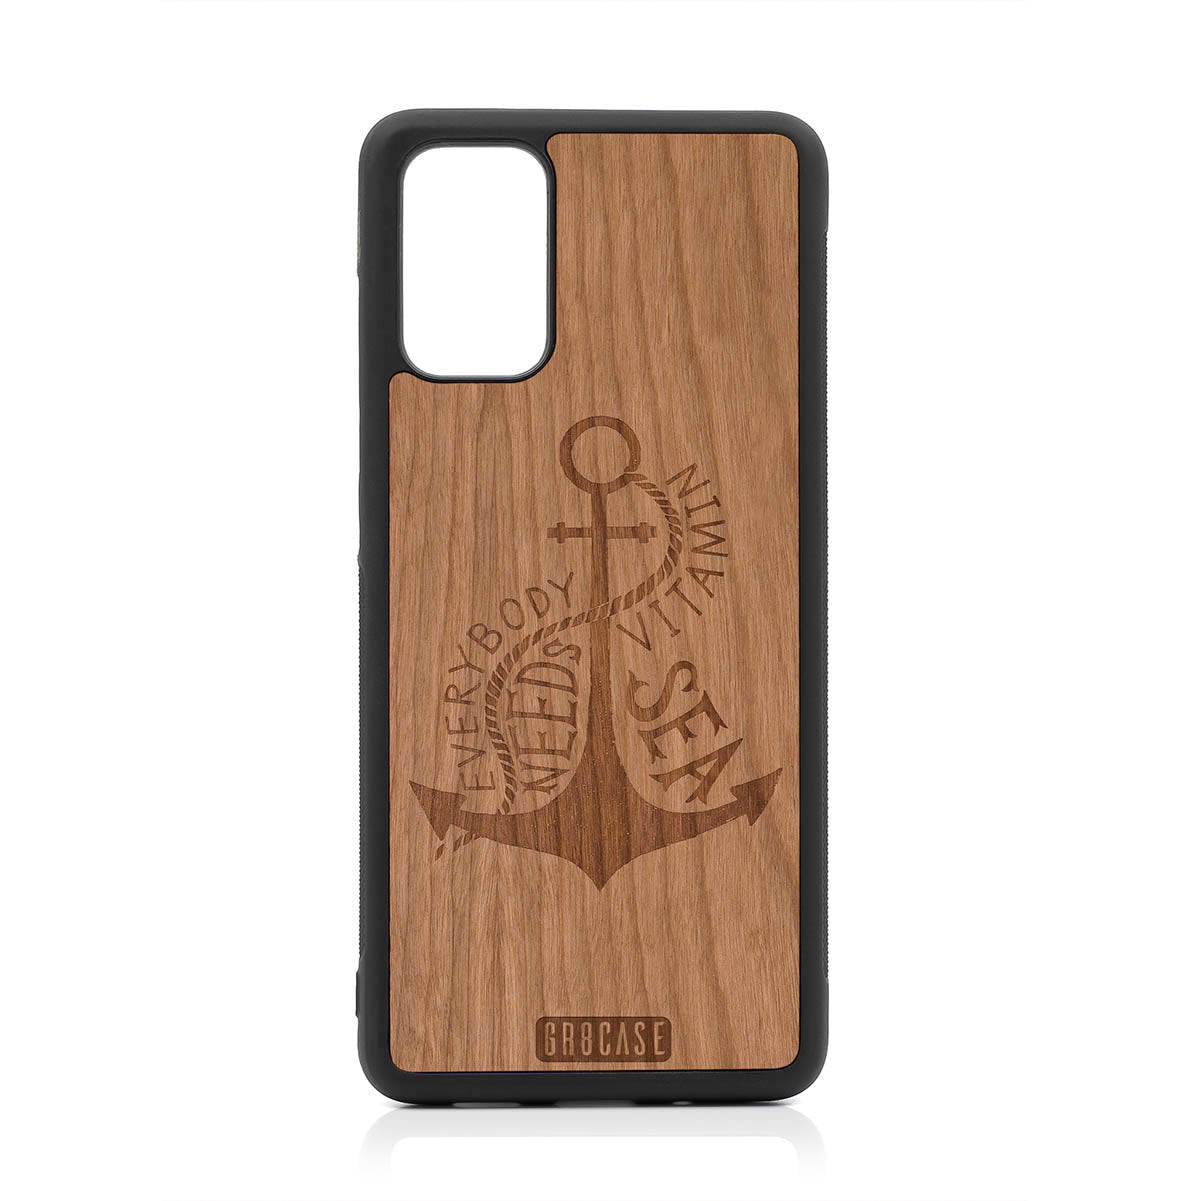 Everybody Needs Vitamin Sea (Anchor) Design Wood Case For Samsung Galaxy S20 Plus by GR8CASE